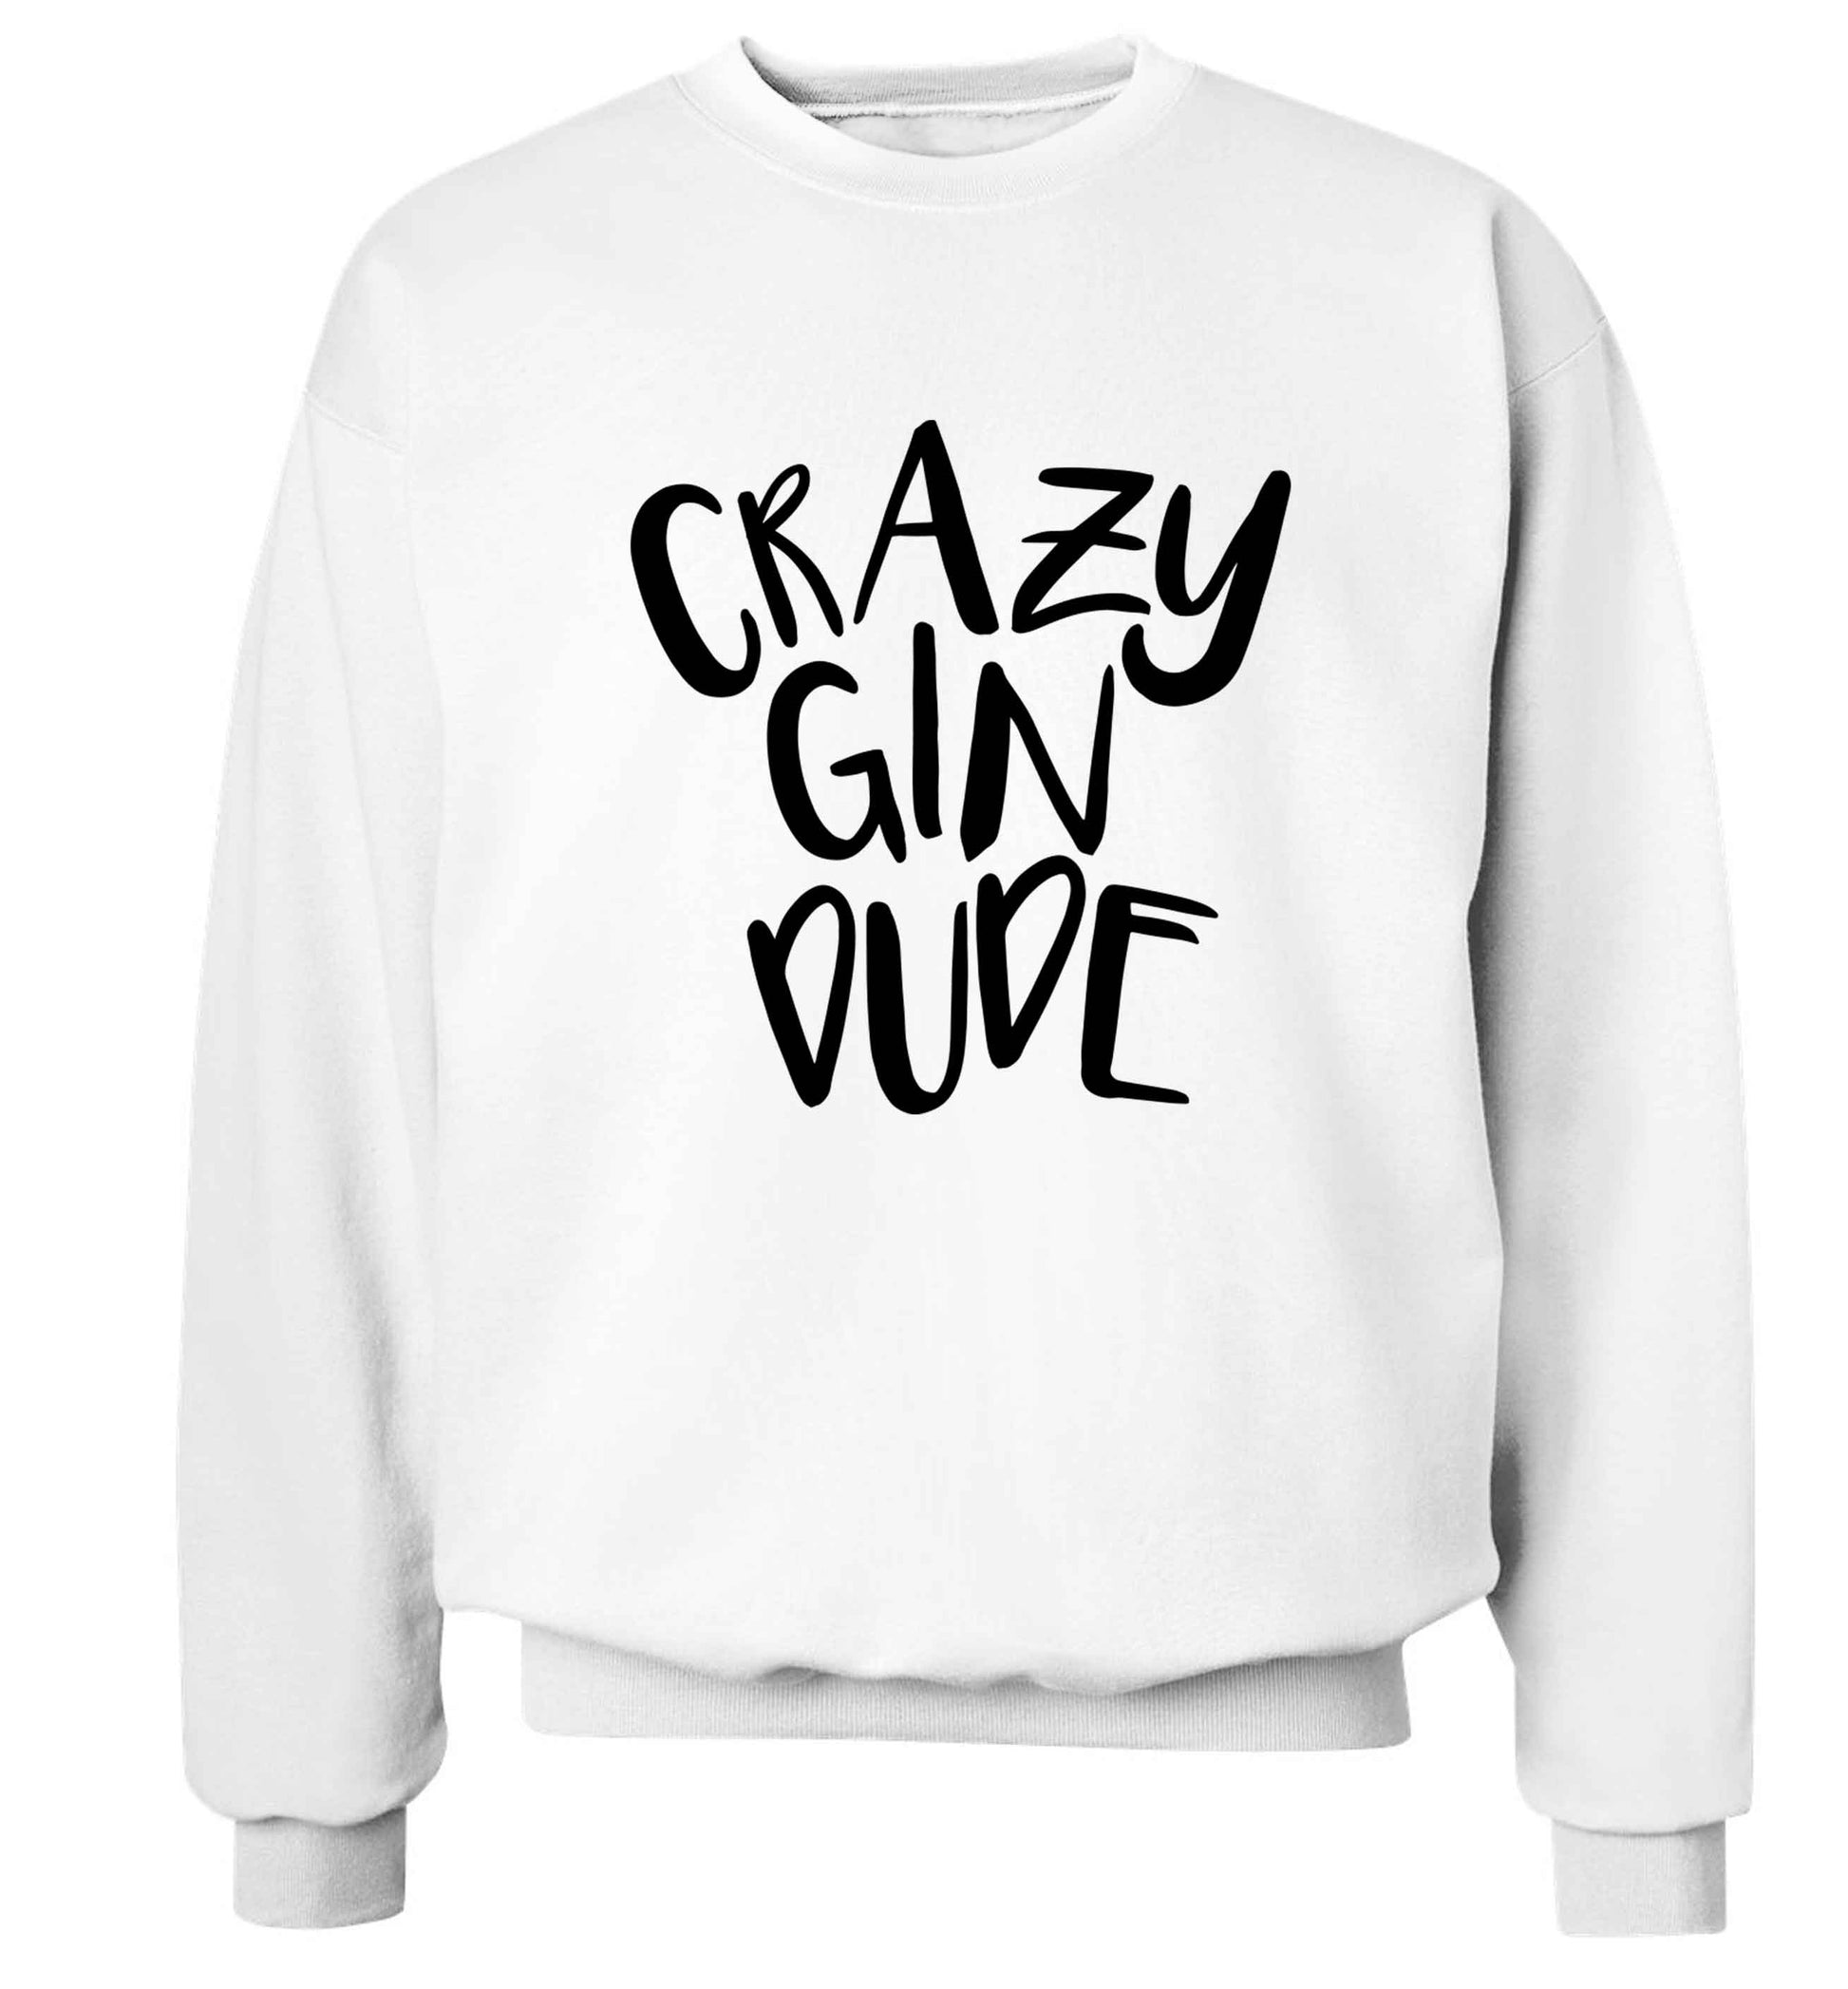 Crazy gin dude Adult's unisex white Sweater 2XL